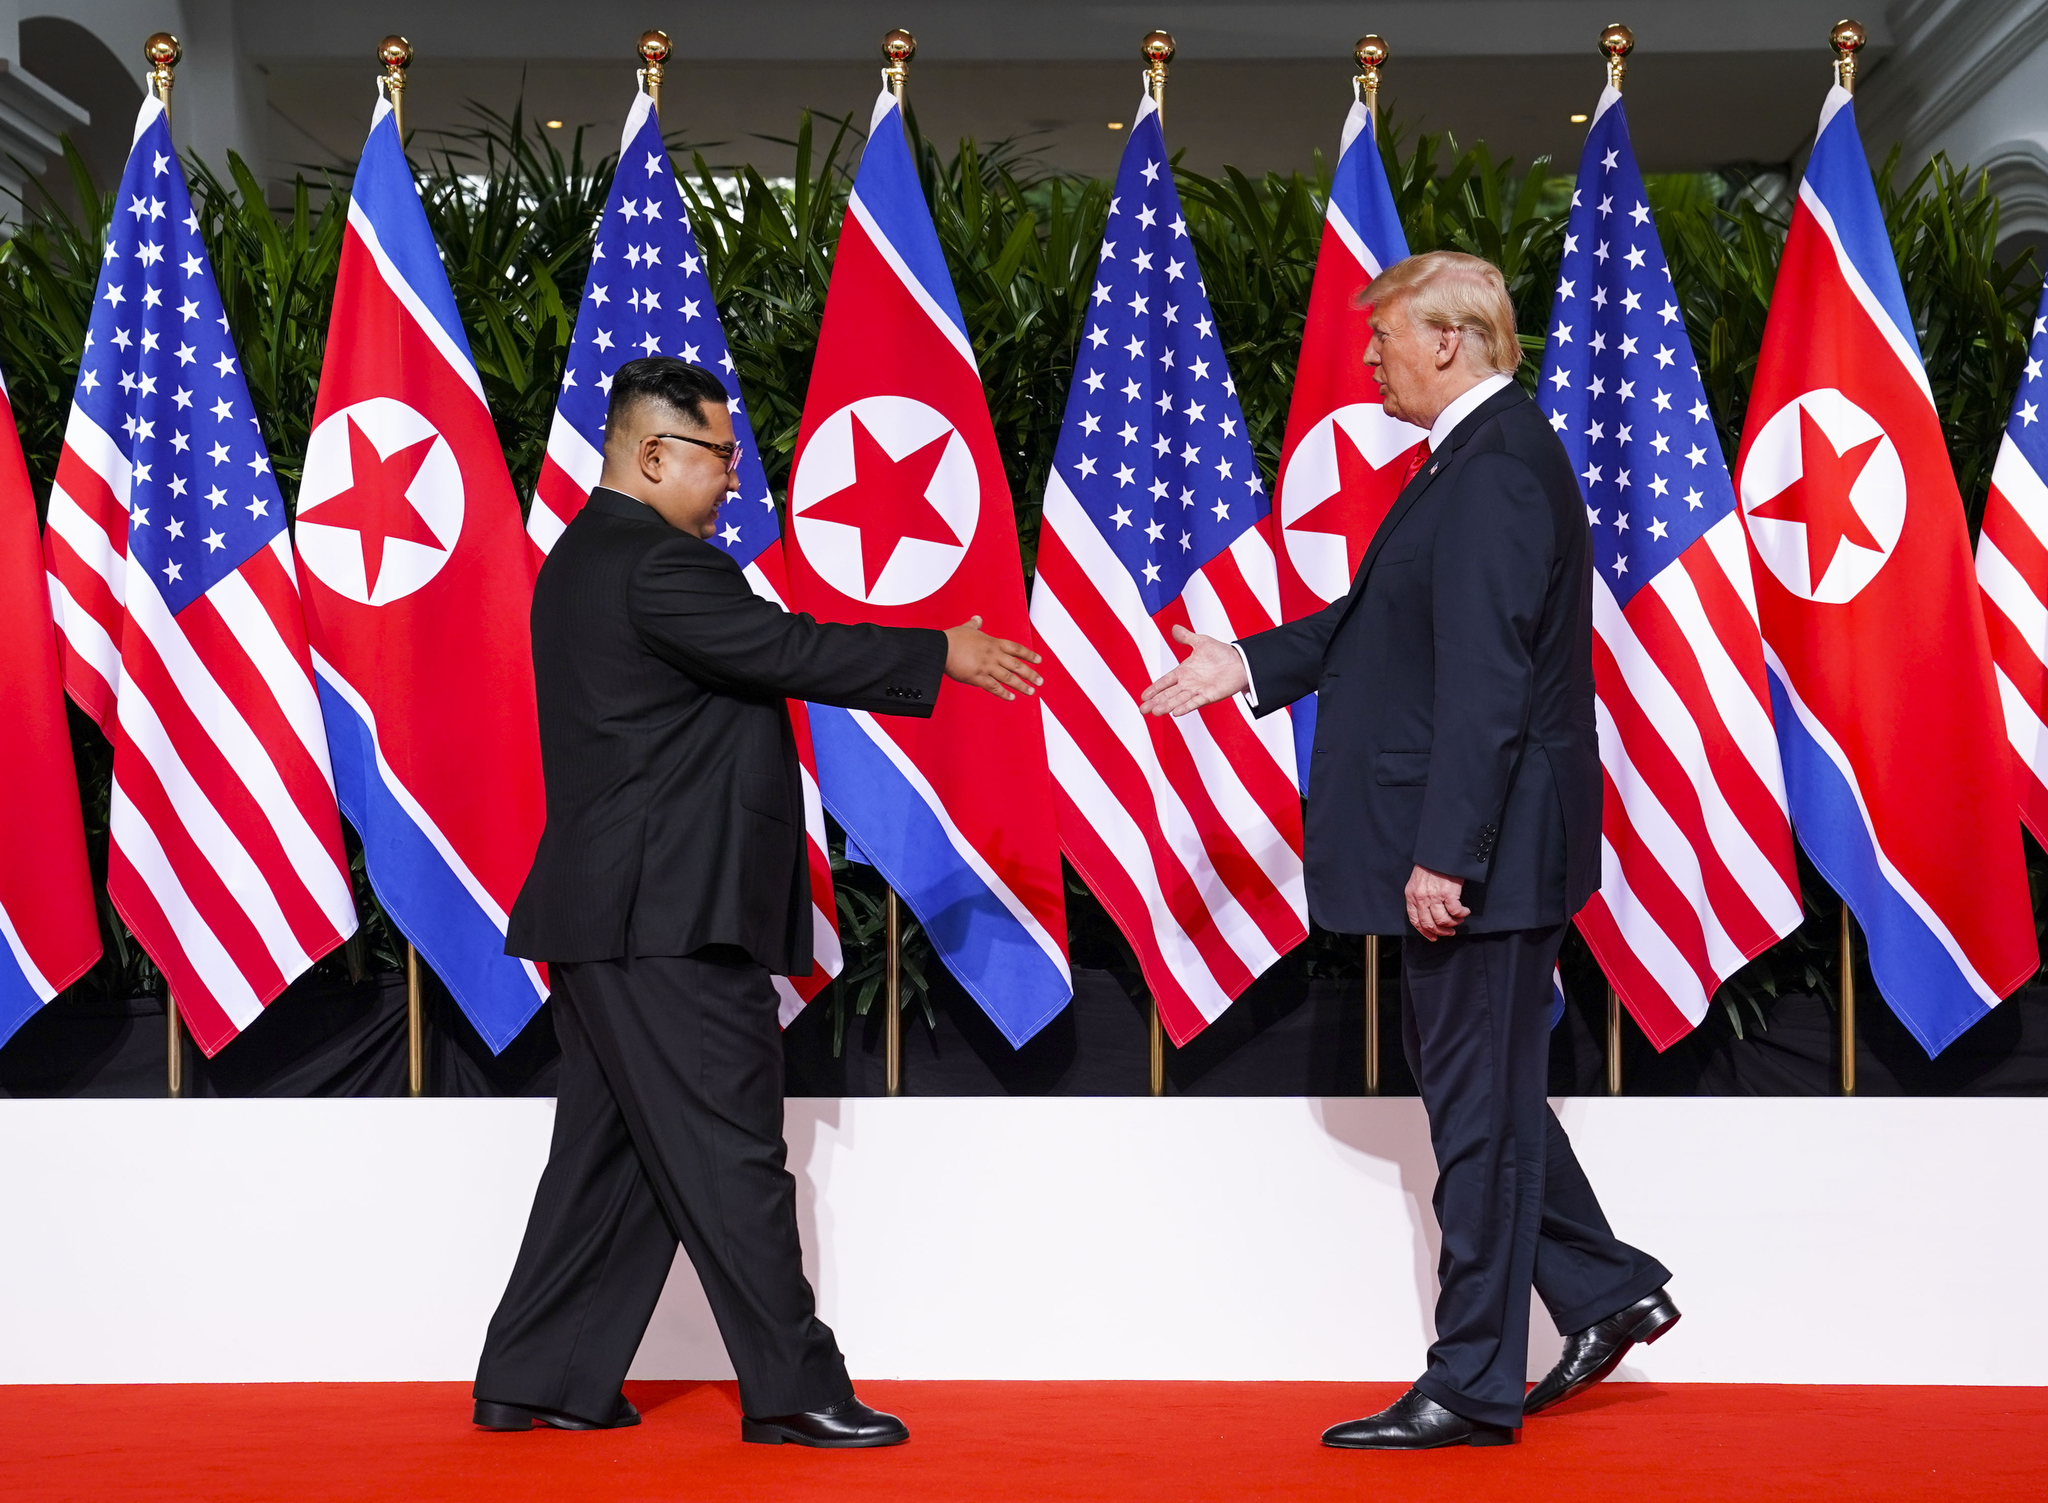 When Kim Jong-un meet for the first time on Sentosa Island in Singapore on June 12, 2018. Trump relishes showing off the “beautiful” and “interesting” letters he receives from Kim, a man he once threatened with annihilation.